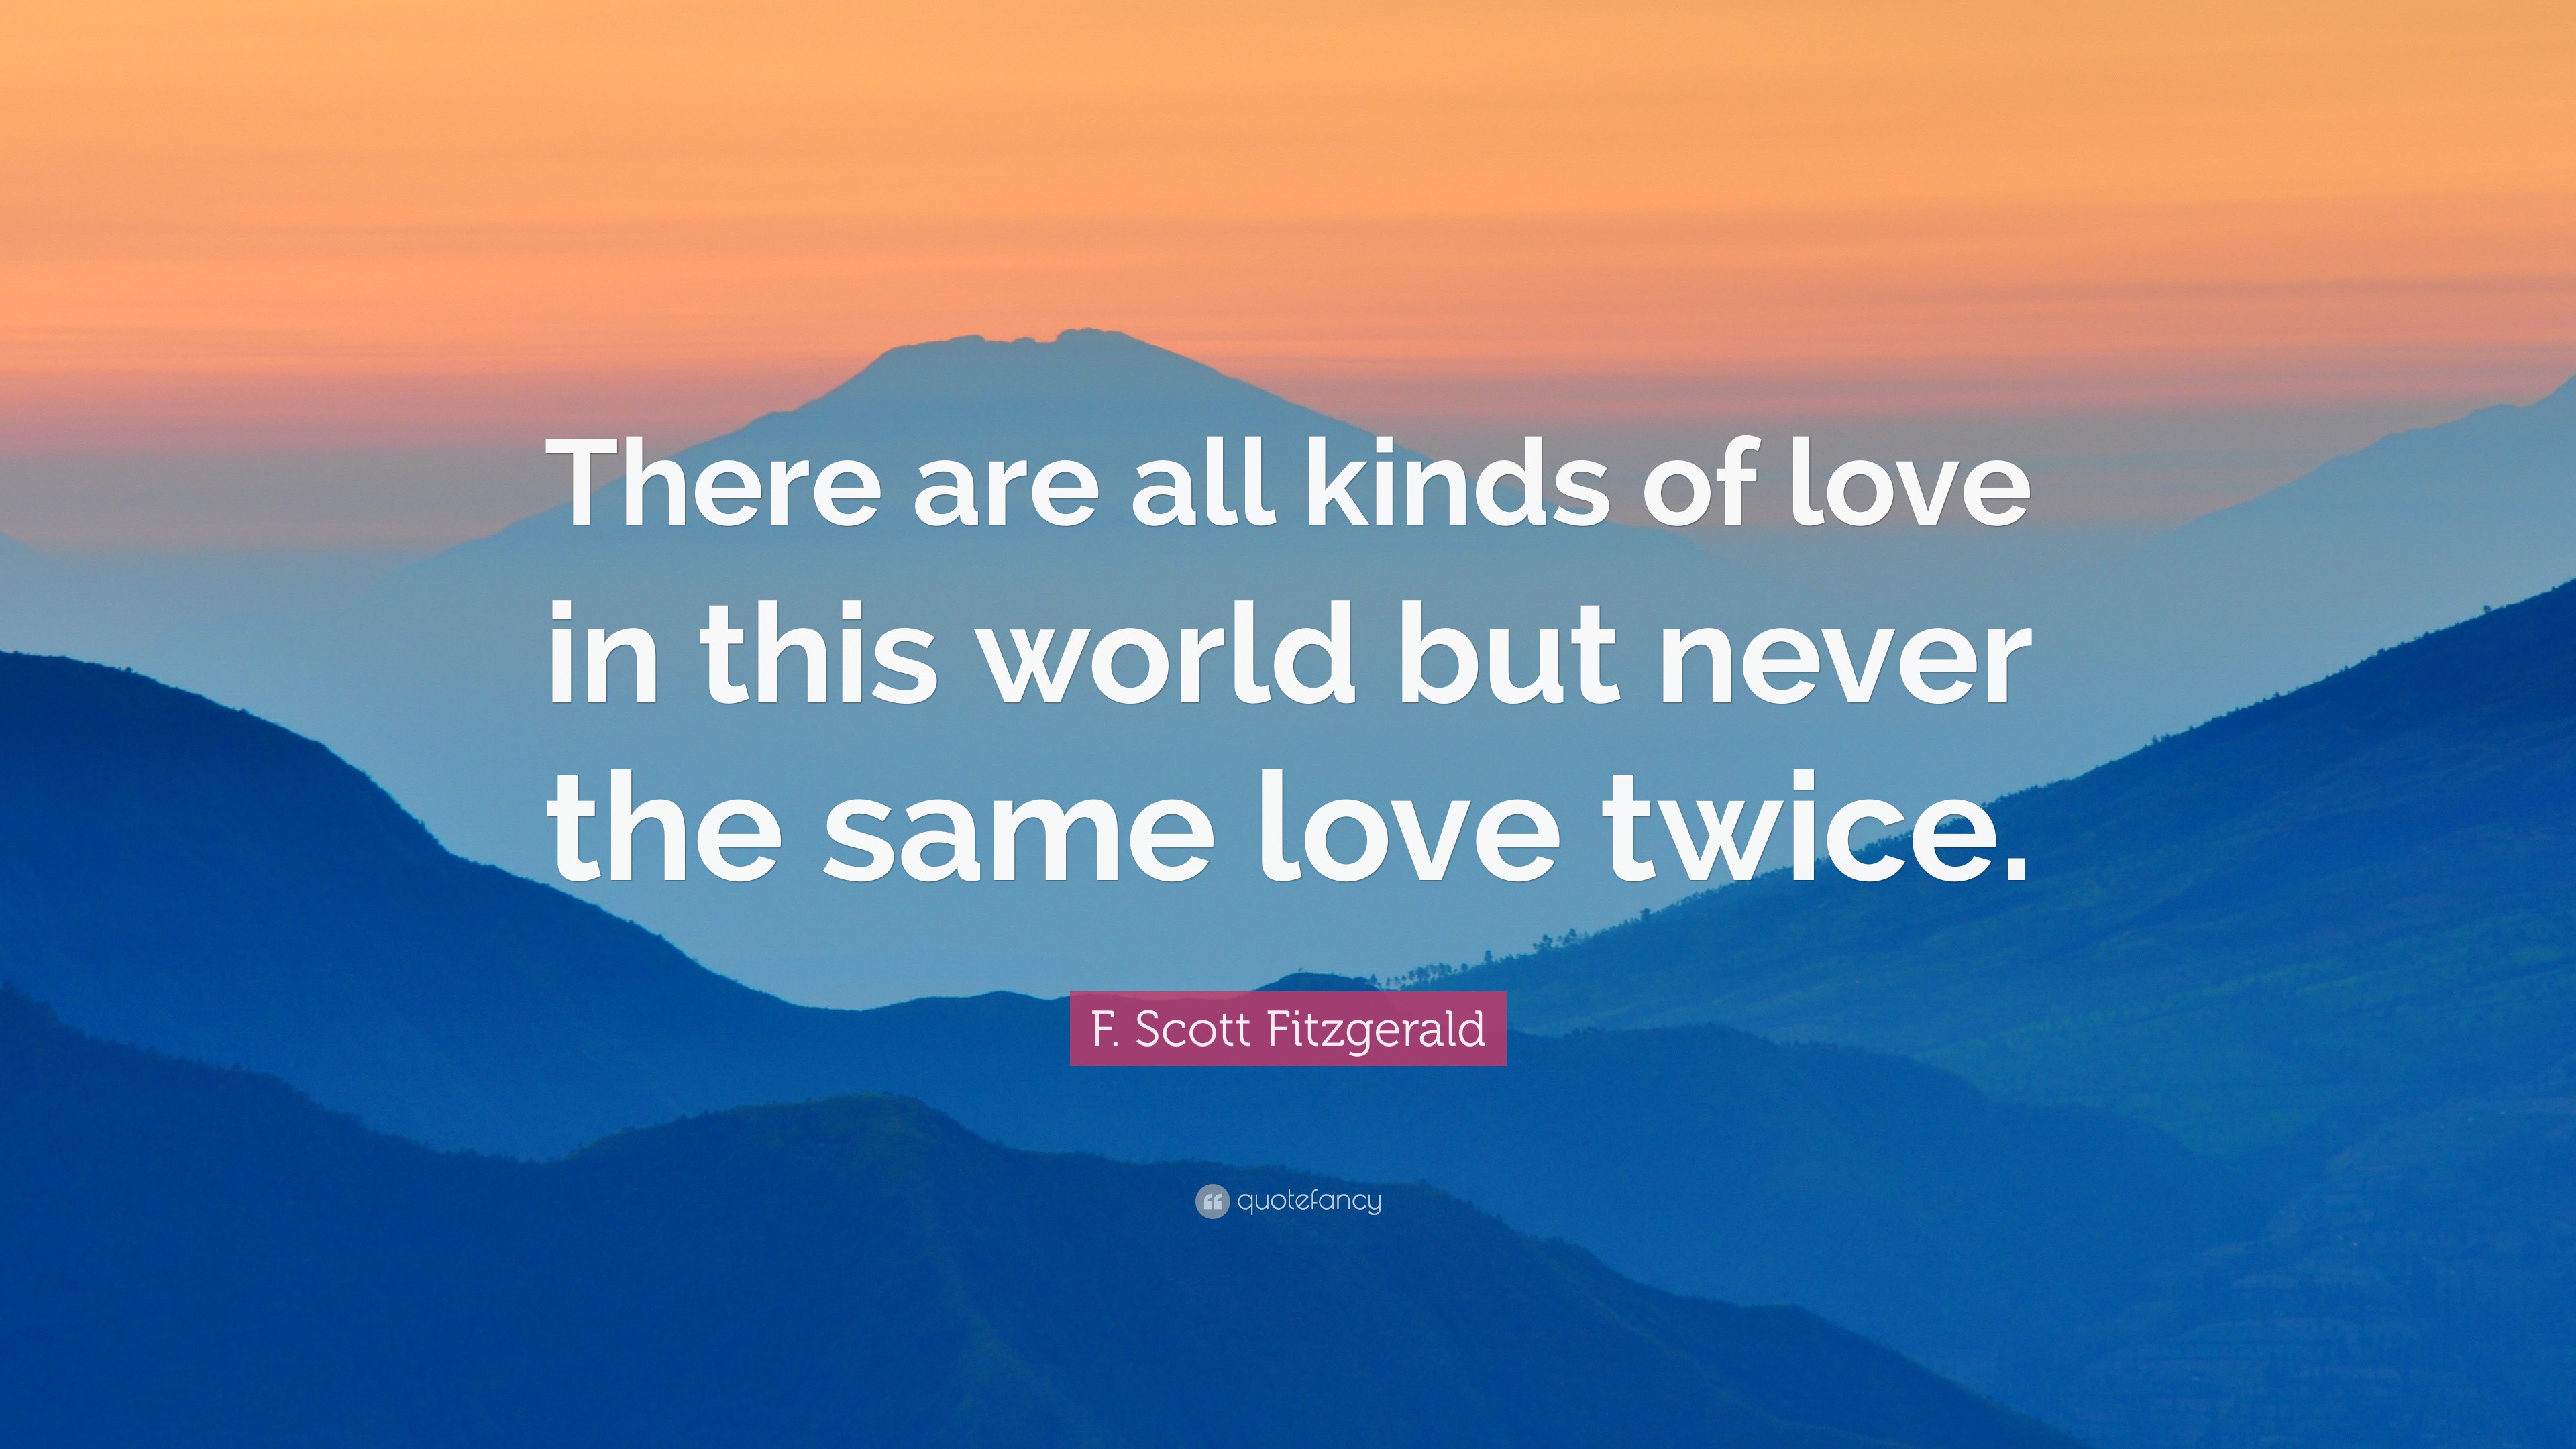 F Scott Fitzgerald Quote “There are all kinds of love in this world